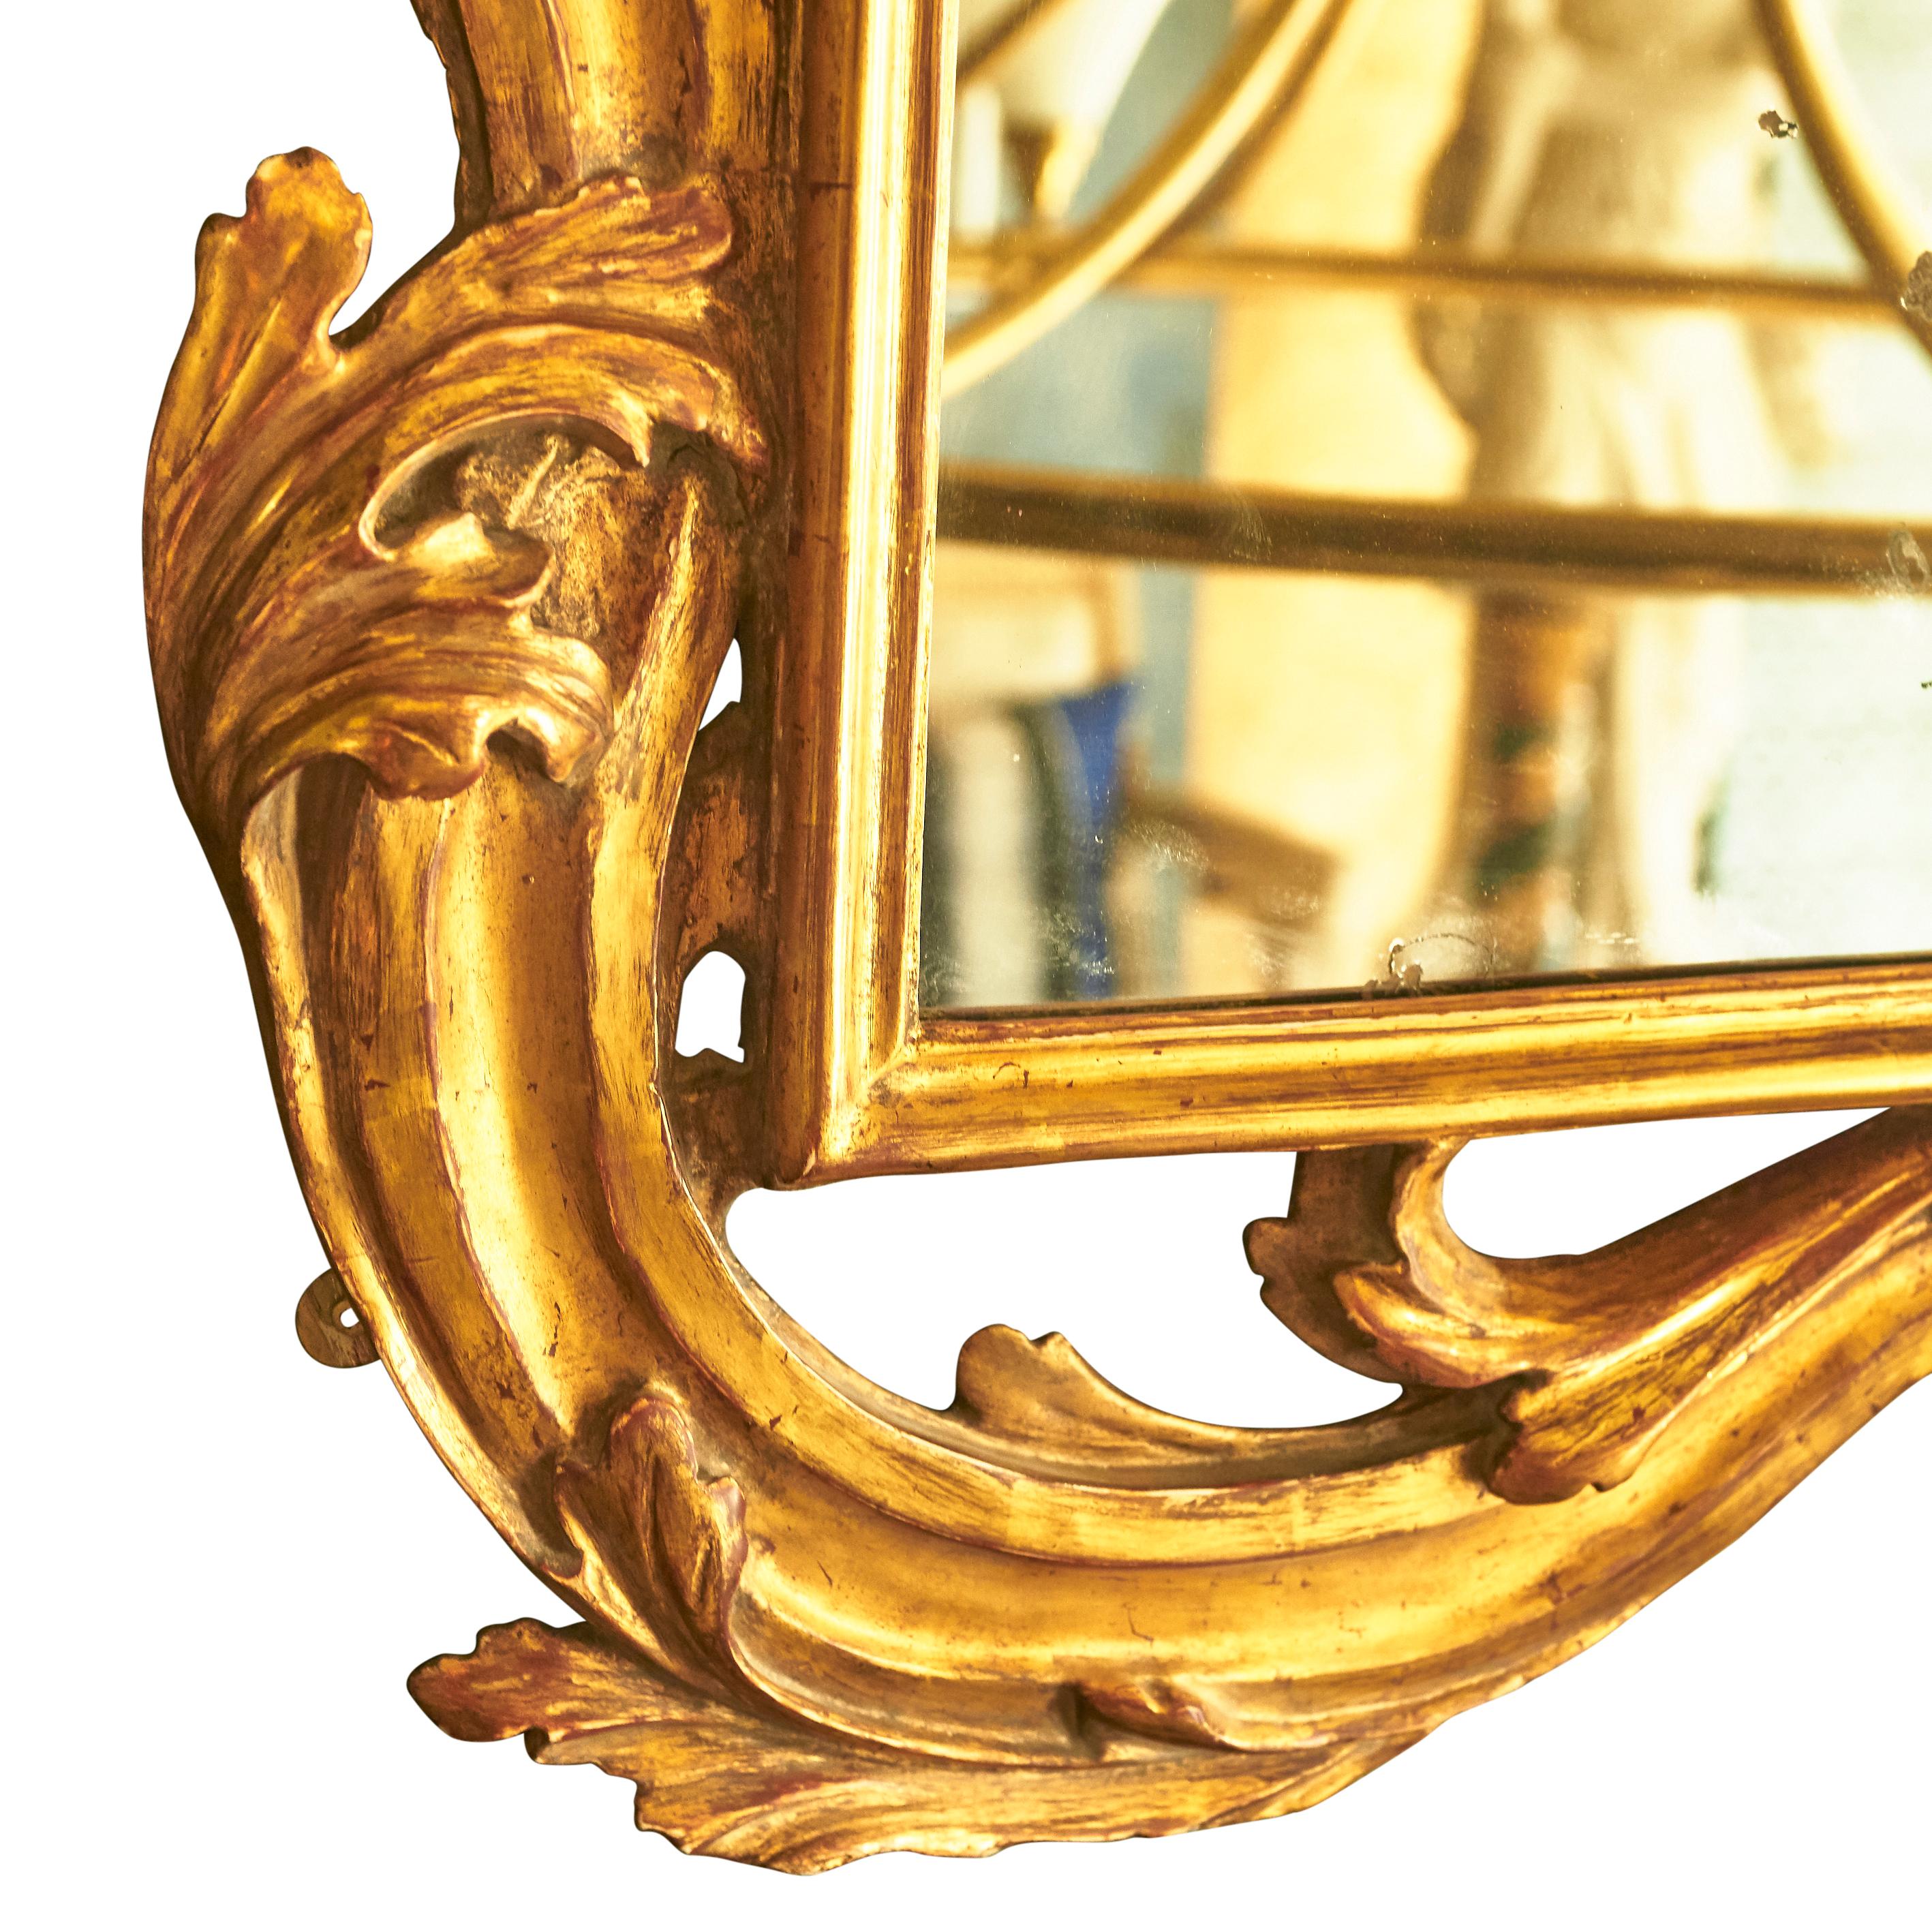 A very large landscape orientated giltwood mirror, with deeply carved foliate frame around a rectangular border, from Tuscany, circa 1770.
The original mirror plate with some patination, as seen in the images. The giltwood frame with  some